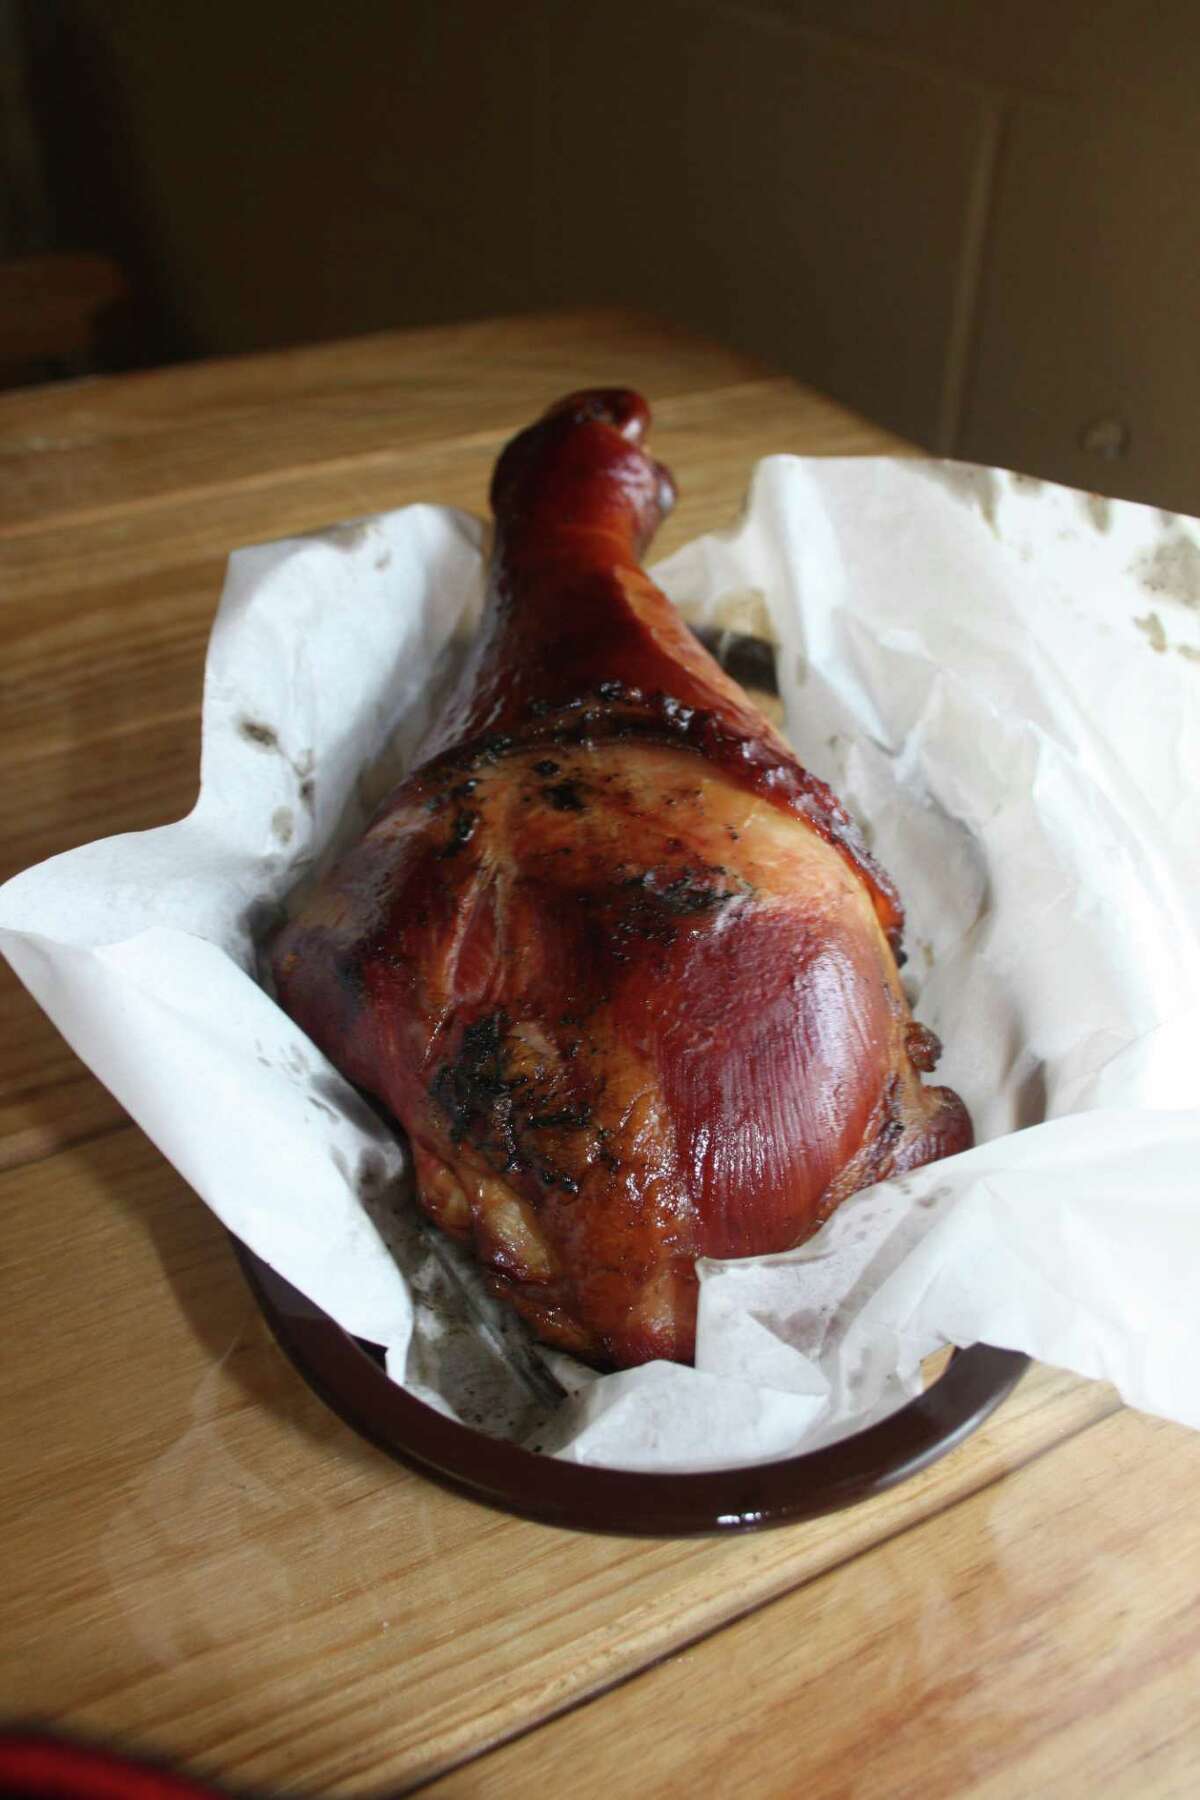 A monster smoked turkey leg is on the Medieval Grille menu for $8, and about a half dozen are made every day until sold out.